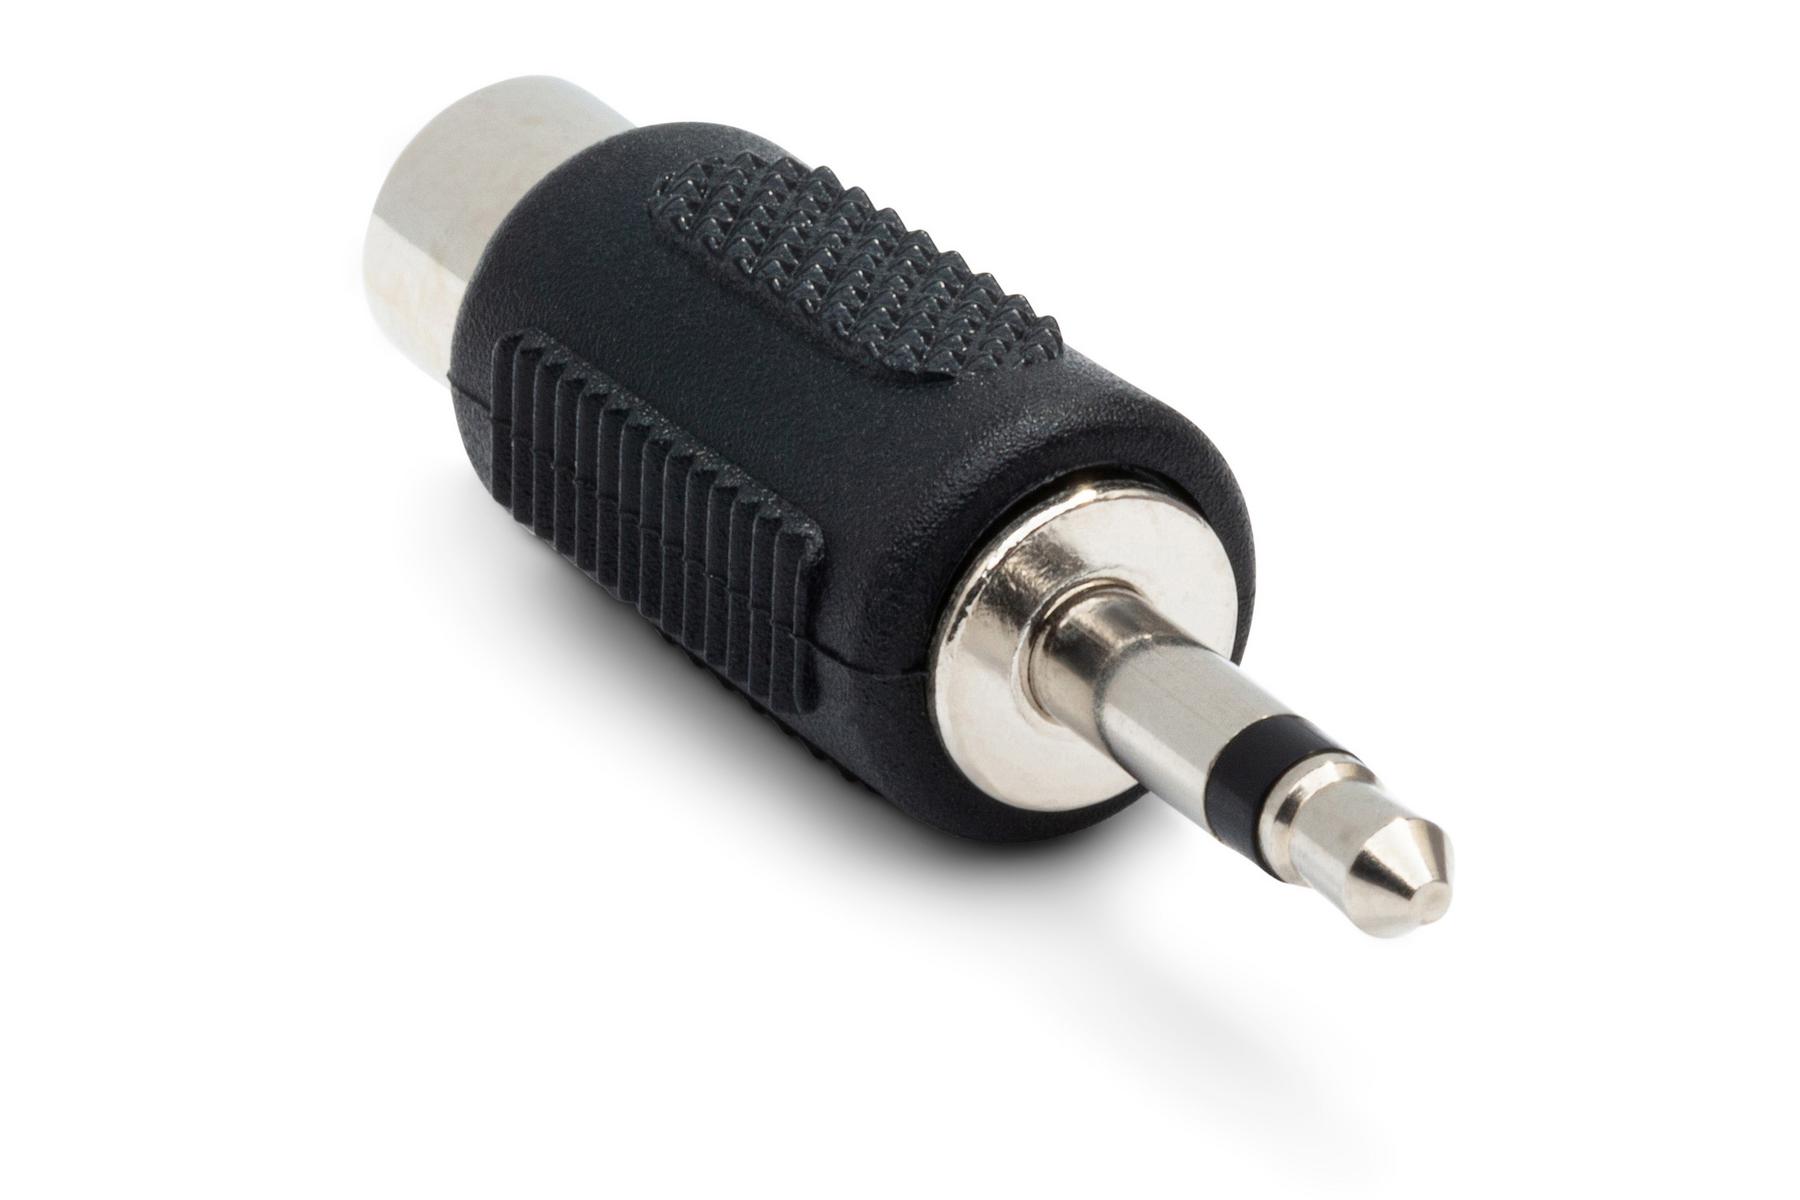 RCA to 3.5 mm TS - Adapter - General Adapters